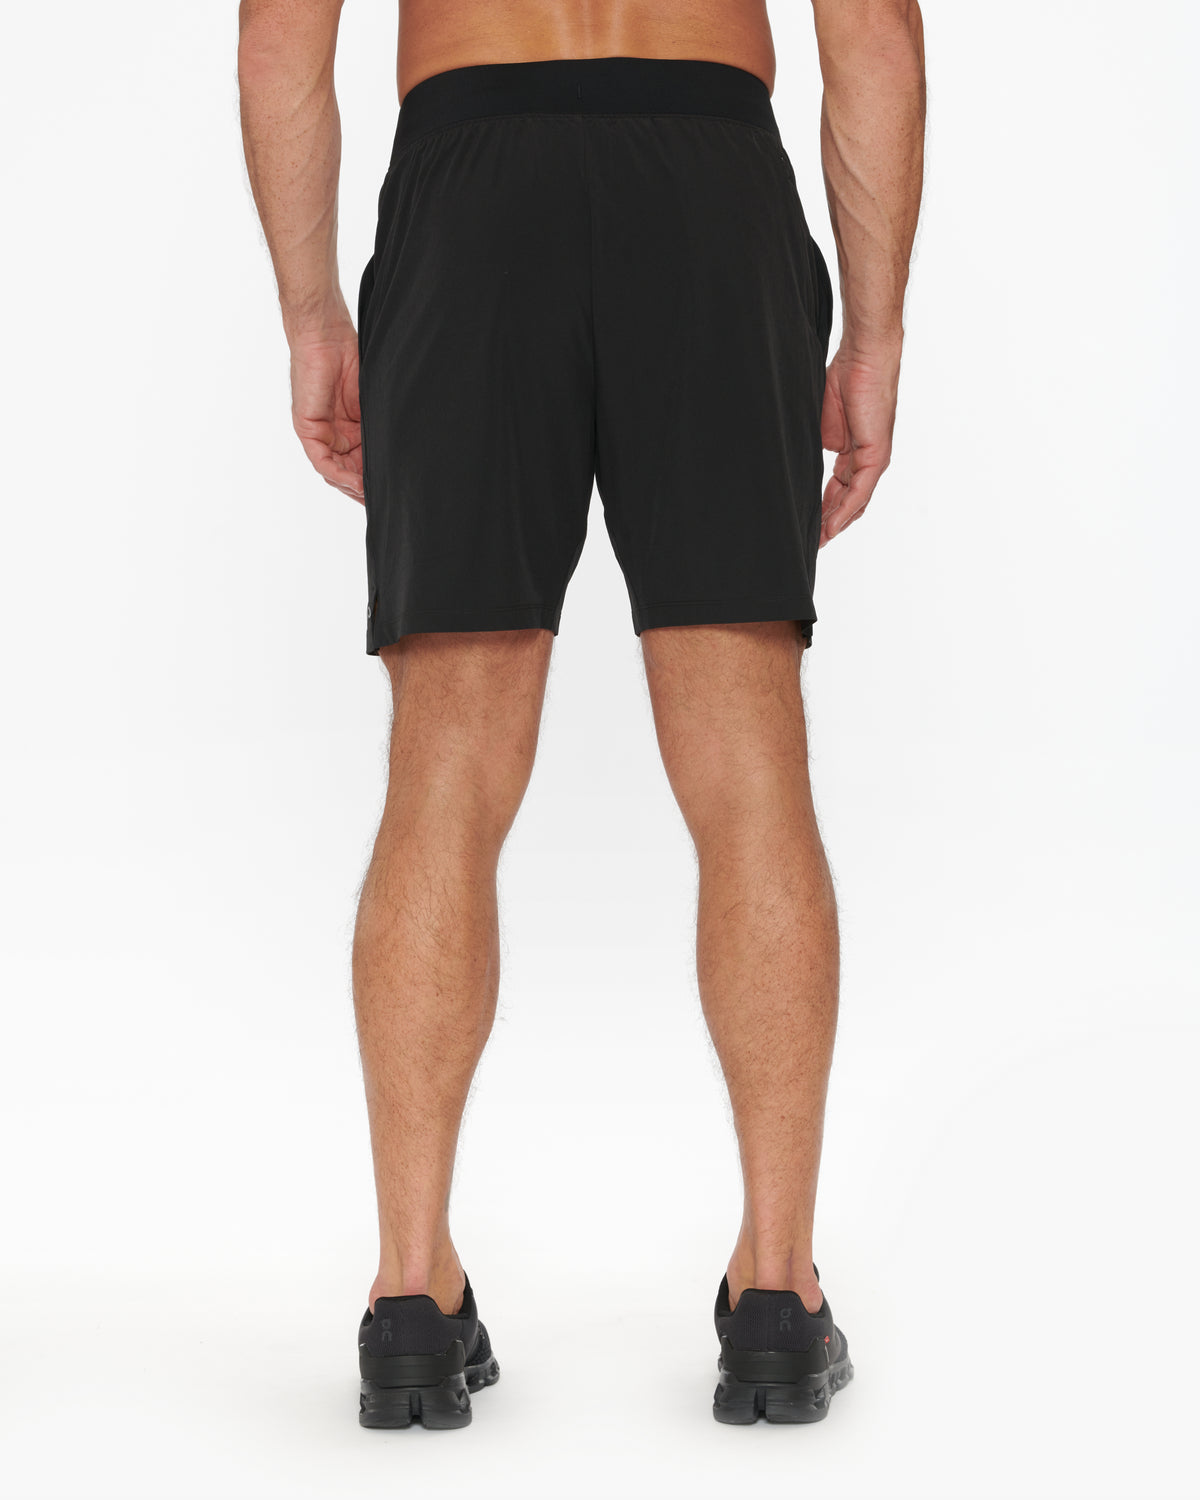 Alo Yoga Repetition Short 7 - Unlined – The Shop at Equinox